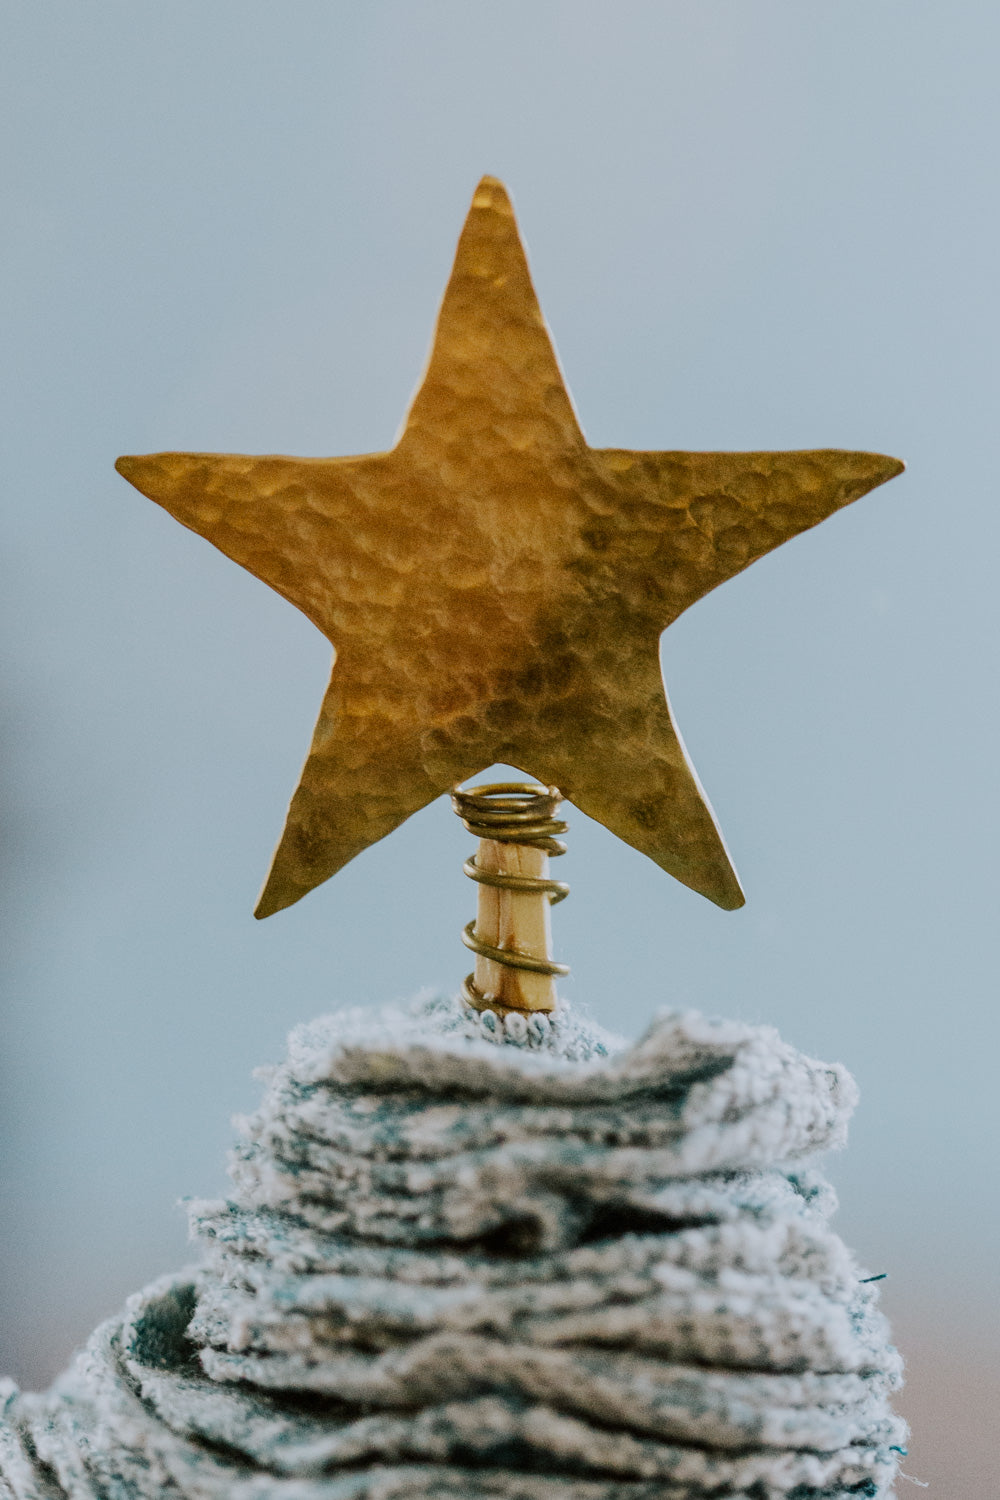 Ethical fair trade upcycled stacked sweater Christmas tree handmade by Grain of Rice Project artisans in Kibera slum, Kenya | This close up of the handmade brass star topper shows its texture.